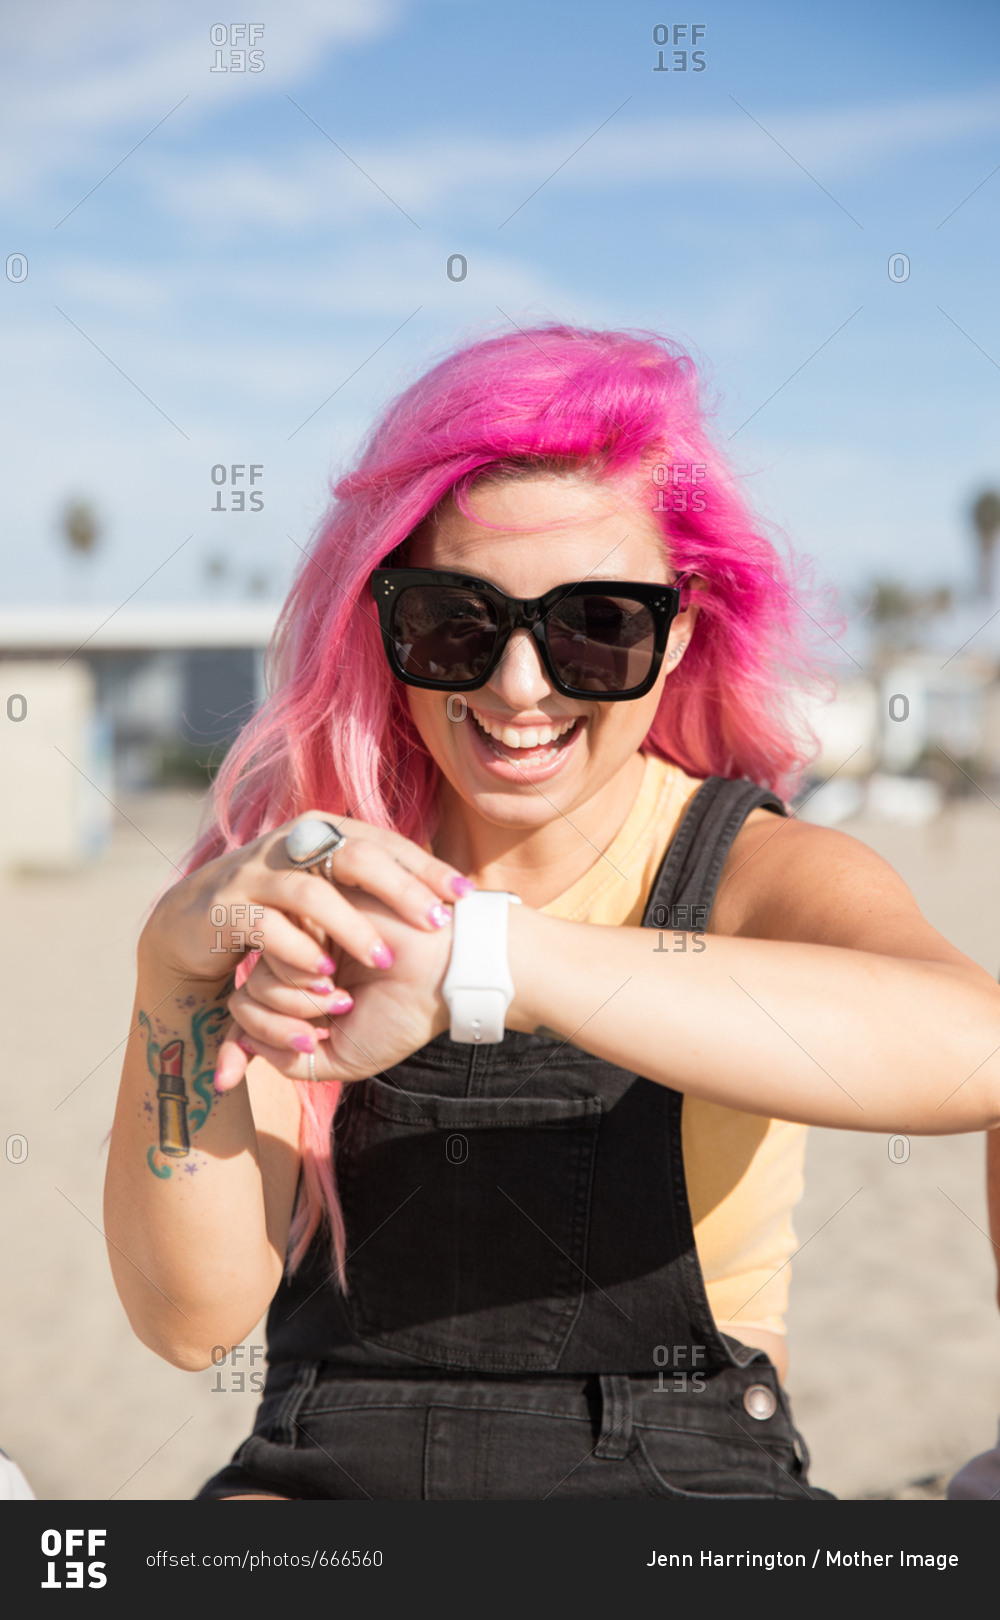 A woman looks at her watch, wearable tech, while sitting at the beach so she can connect to work and email